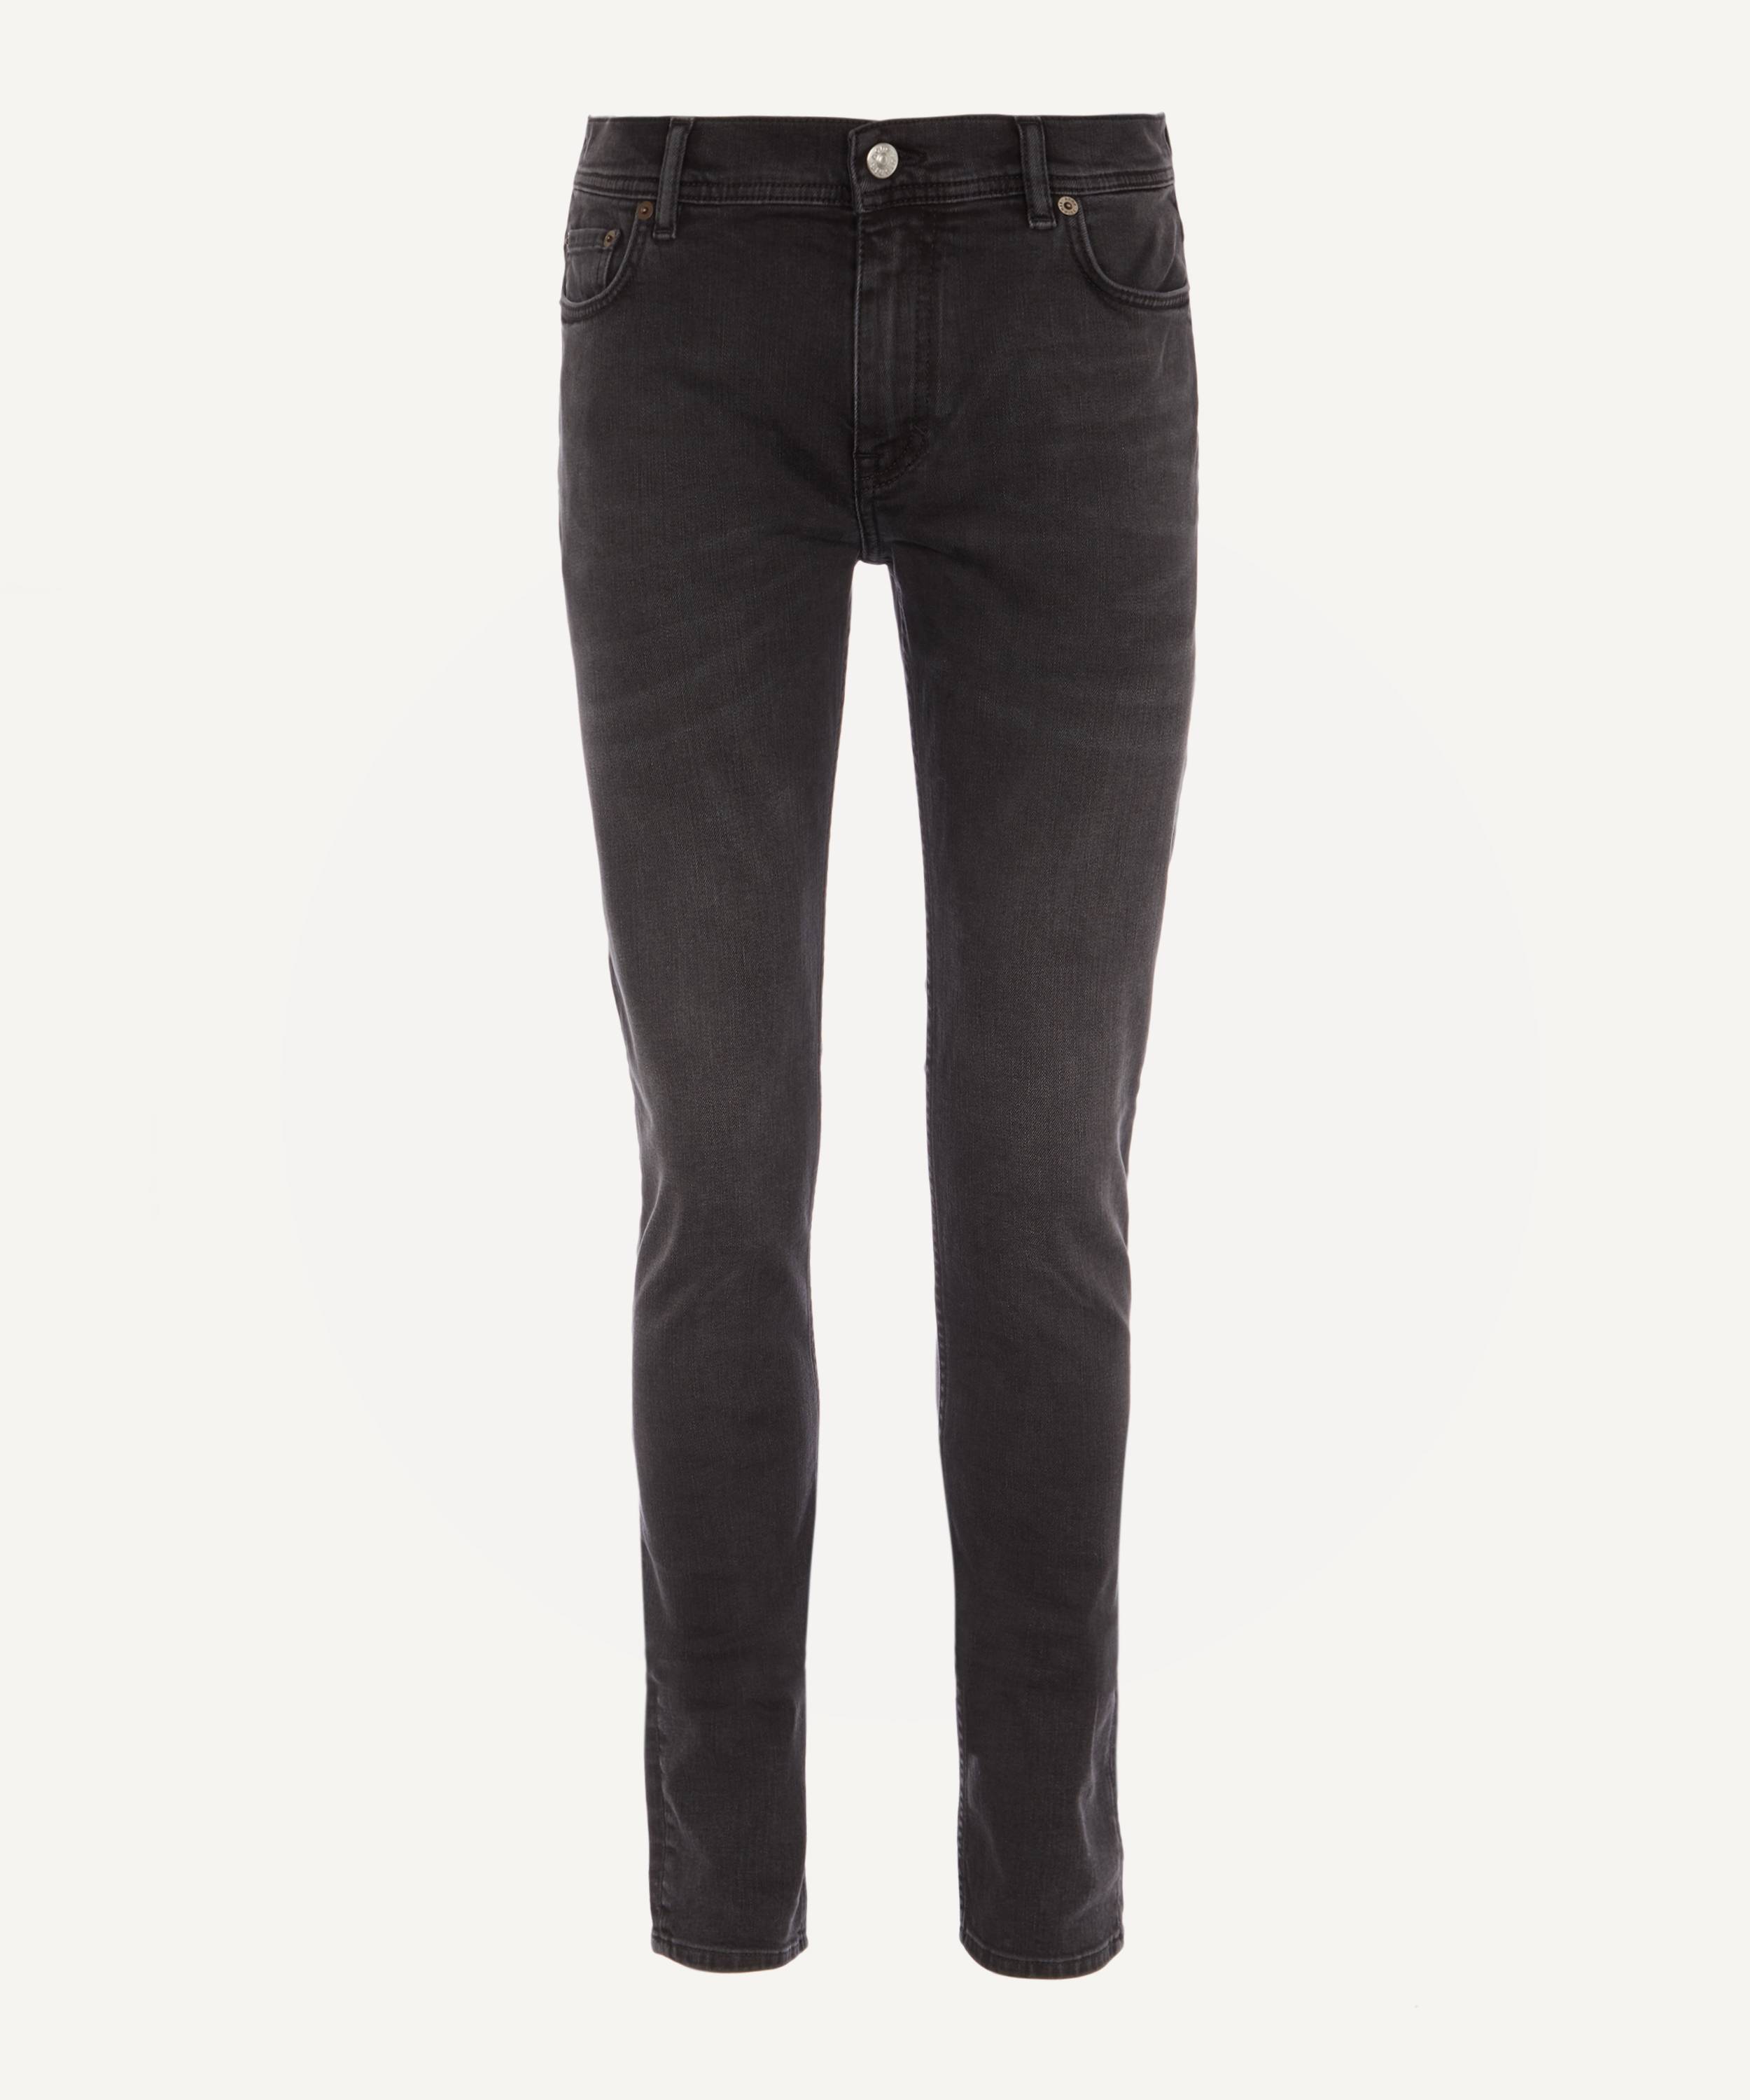 Acne North Used Black Slim Fit Jeans | Liberty